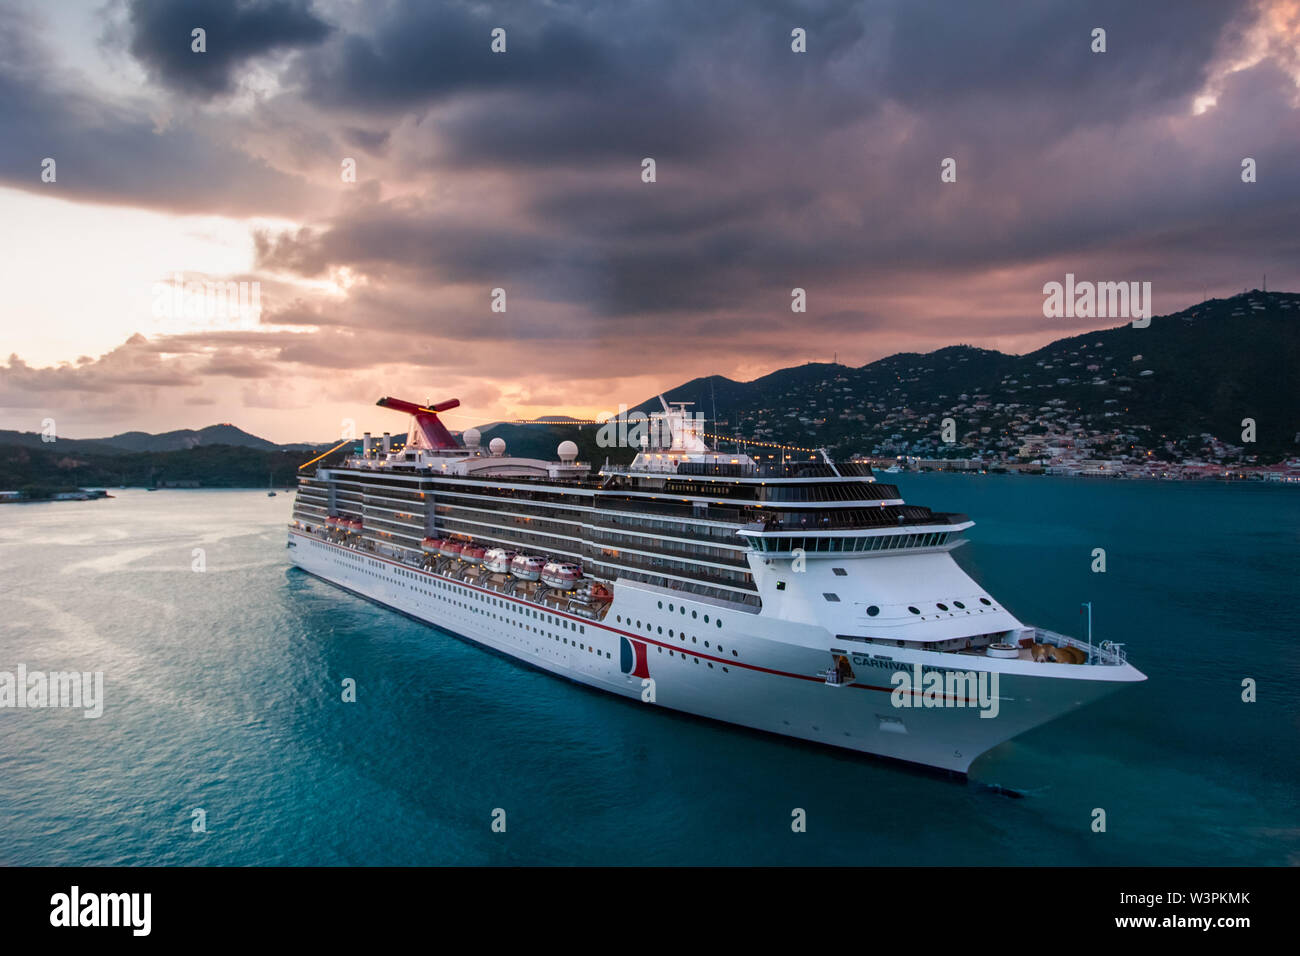 Saint Thomas / Virgin Islands / USA - September 5.2007: View on the massive white cruise ship sailing in the sunset with stormy, dramatic clouds. Stock Photo